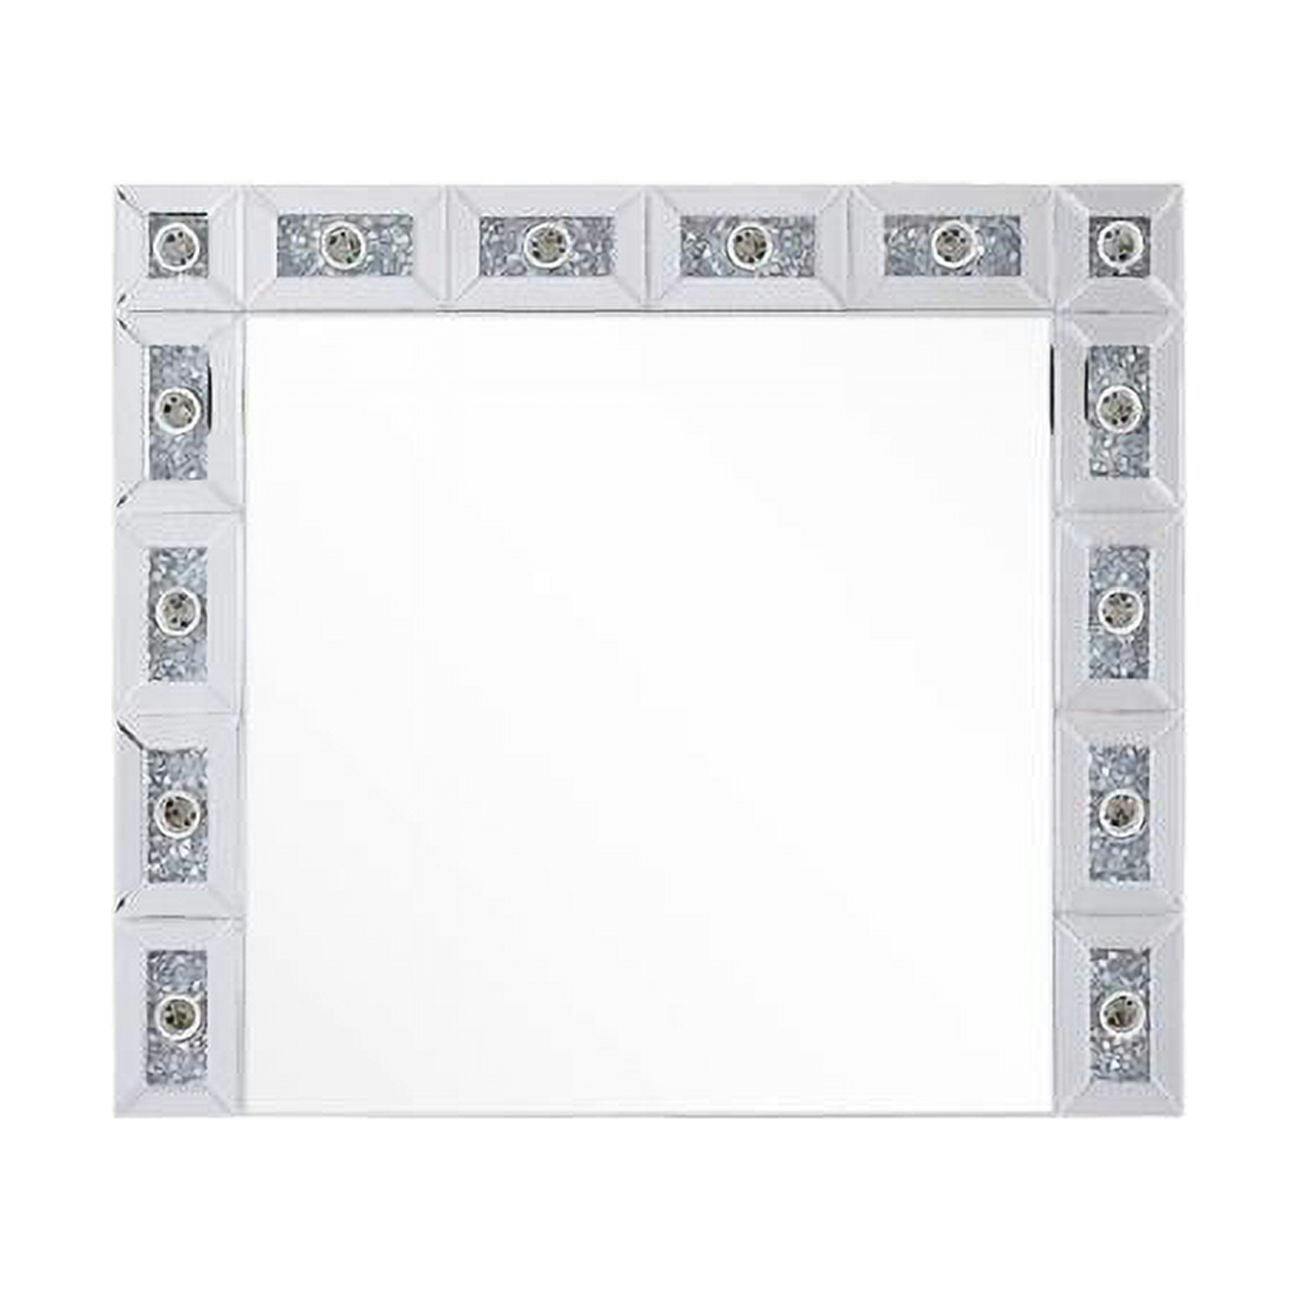 Elegant Rectangular Silver Wall Mirror with Faux Diamonds and LED Lights - 32x28 in